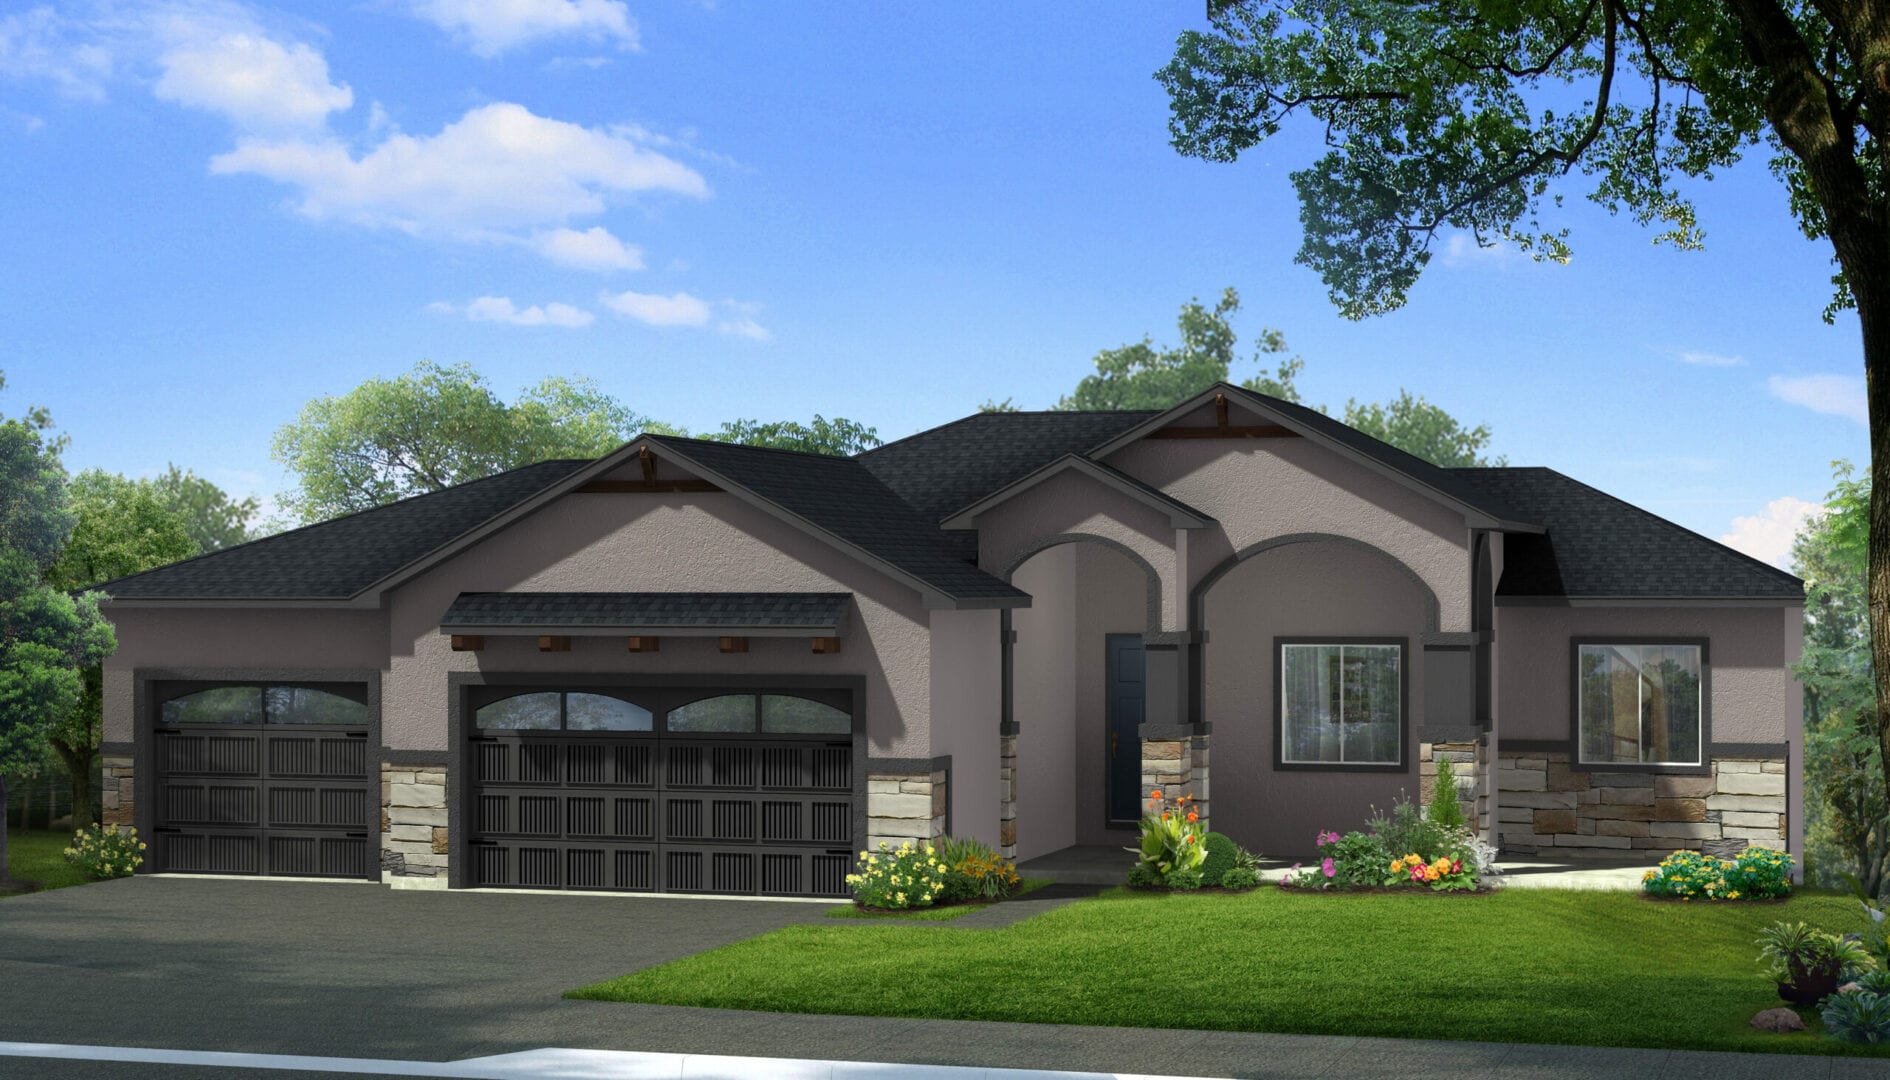 European style ranch house with Car Garage